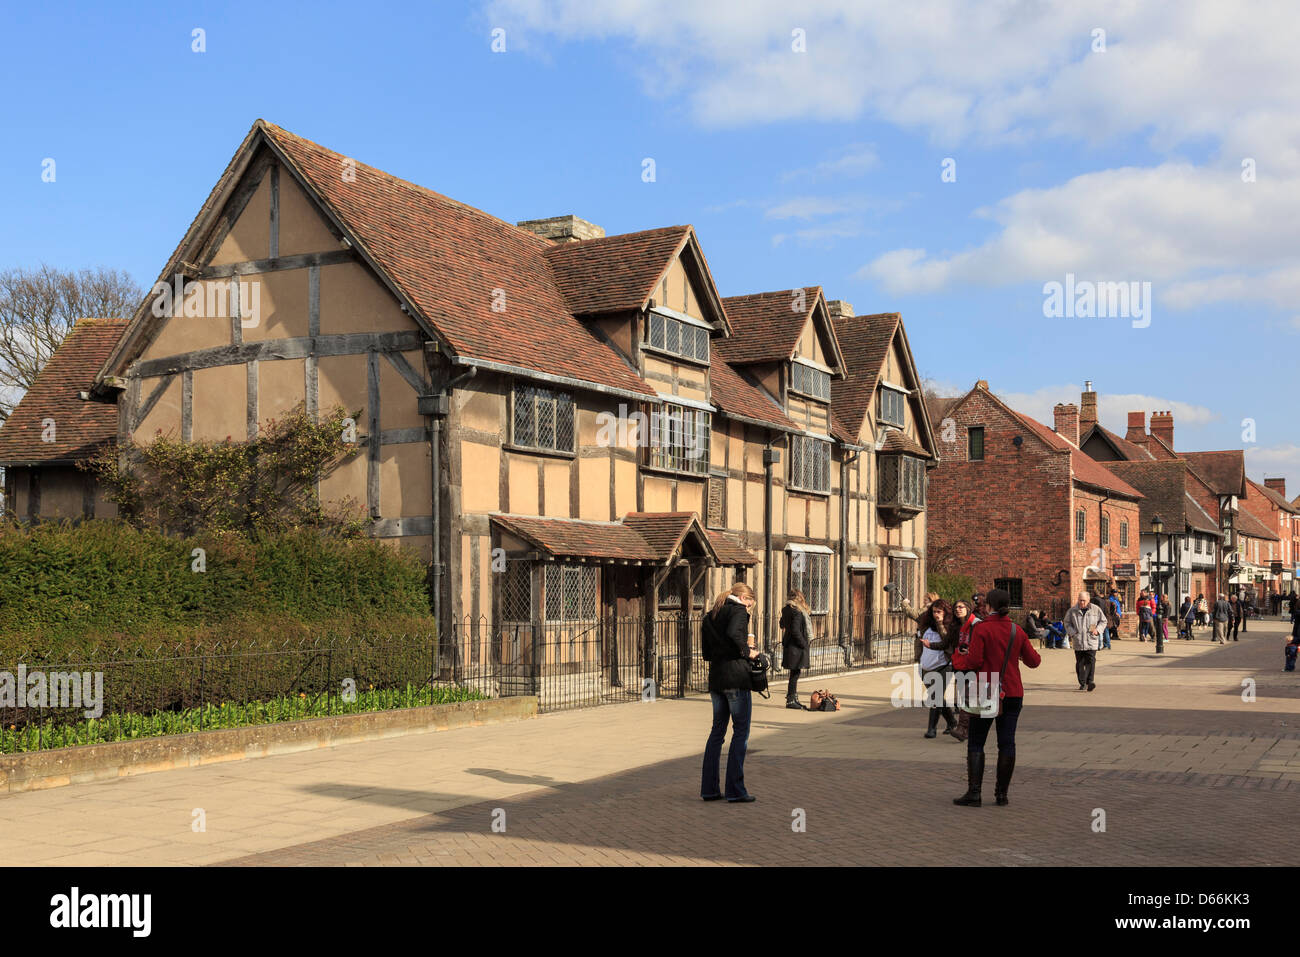 Street scene by Shakespeare's Birthplace 16th century timbered house now a museum. Henley Street Stratford-upon-Avon Warwickshire England UK Britain Stock Photo